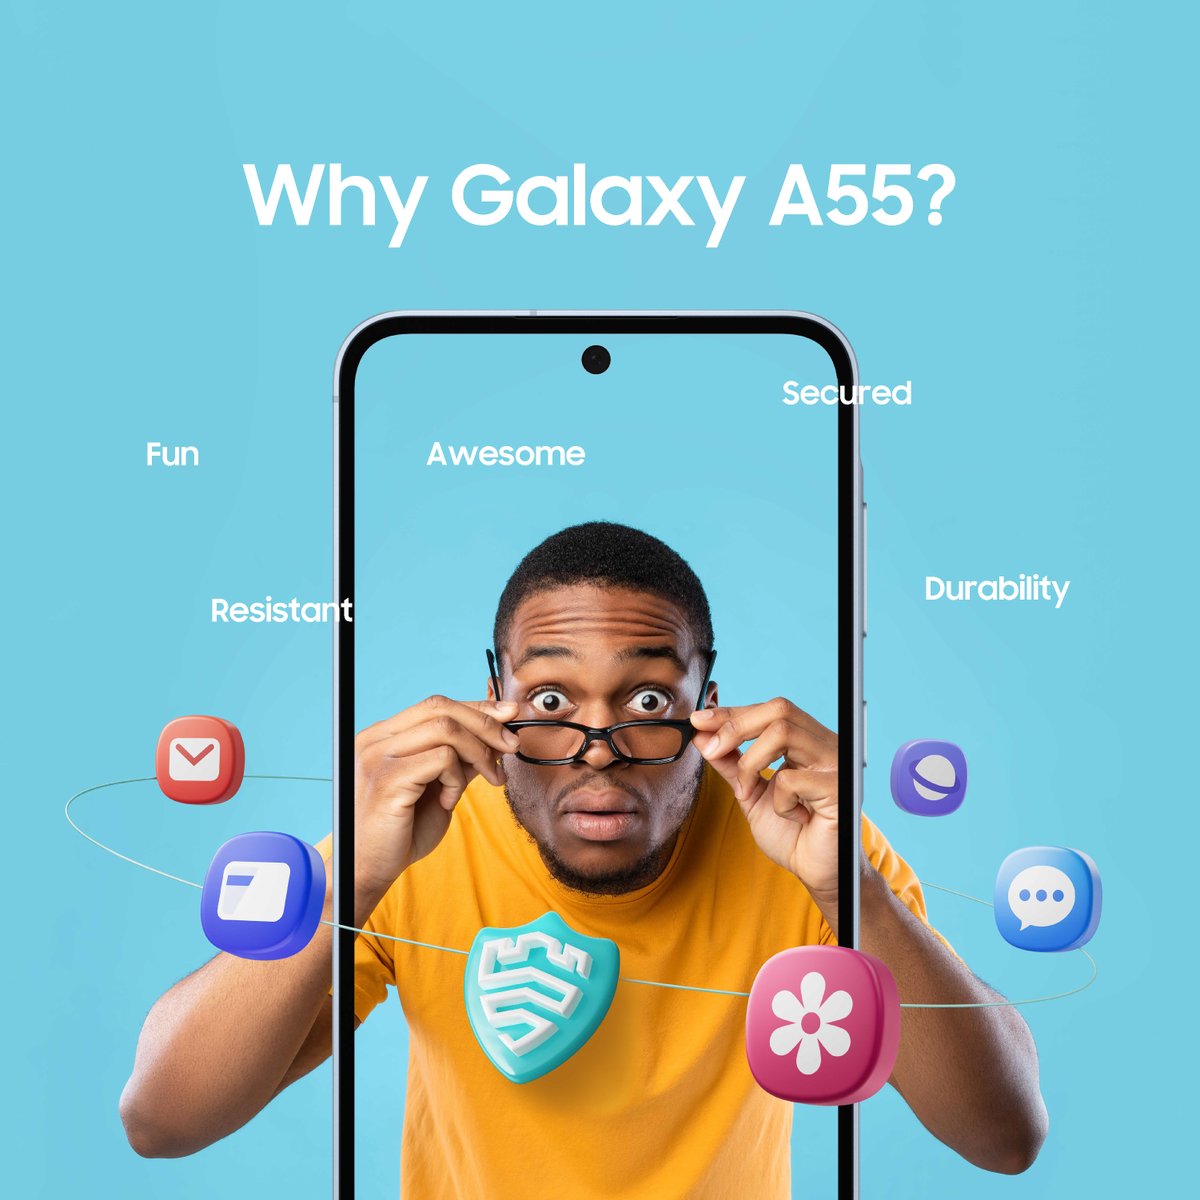 Curious why the #GalaxyA55 5G is your ultimate smartphone pick?

It's a powerhouse of specs, setting it apart from the rest.

From top-notch security to unmatched durability and performance, it's all about the fun and awesomeness!

#AwesomeLikeNeverbefore
#SamsungNigeria